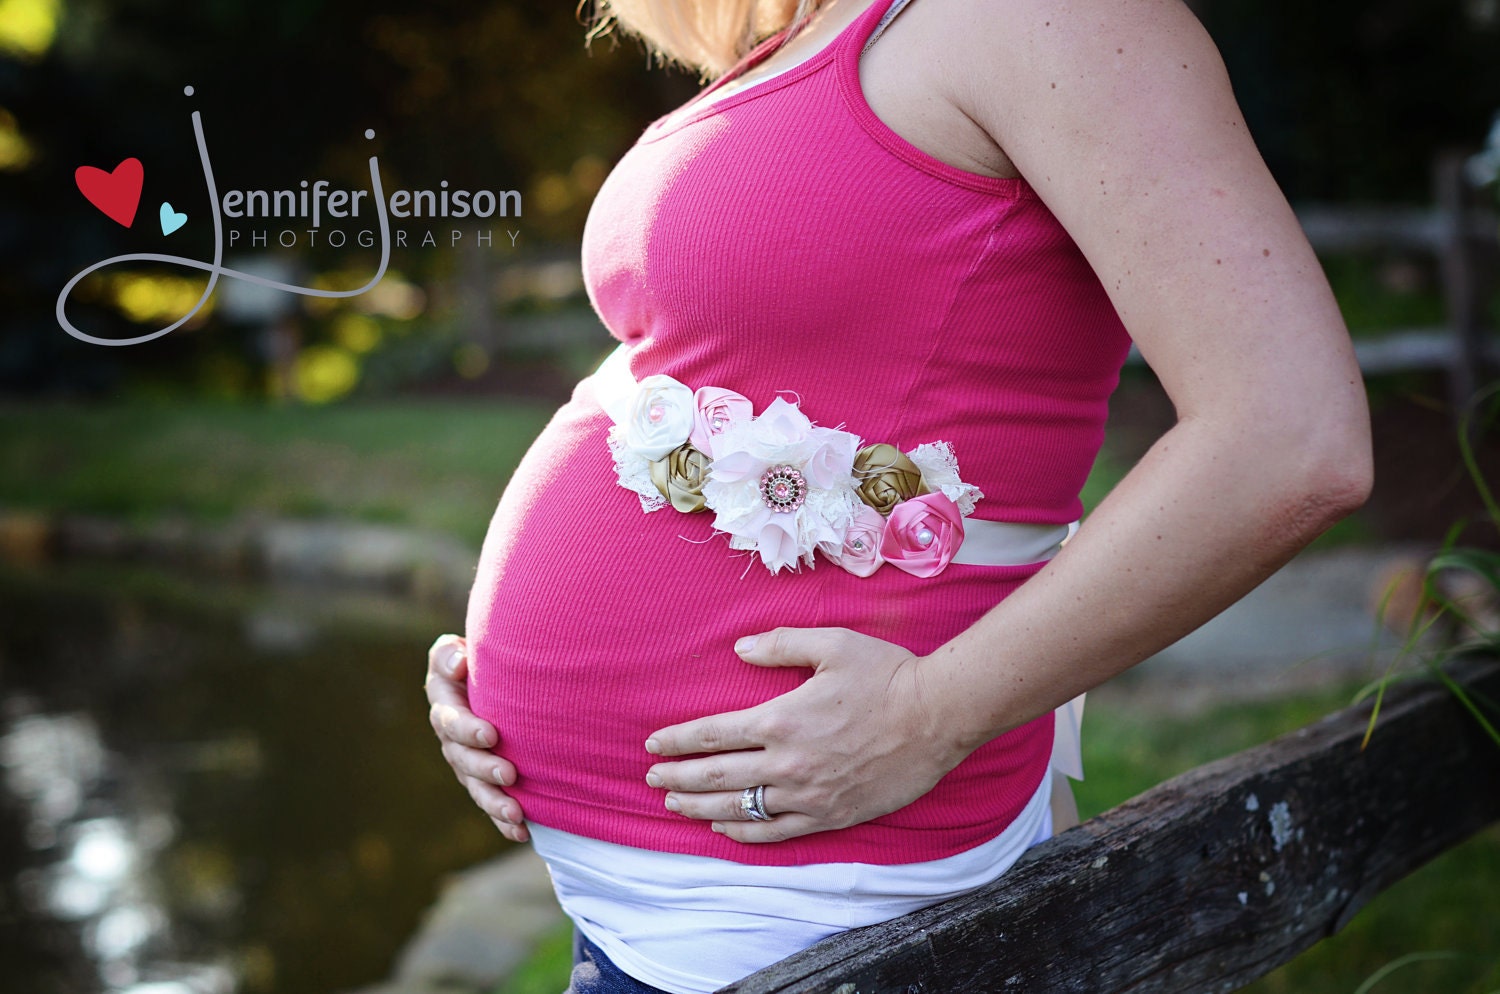 NEW Maternity Sash - Country French Floral Maternity Sash - Photo prop